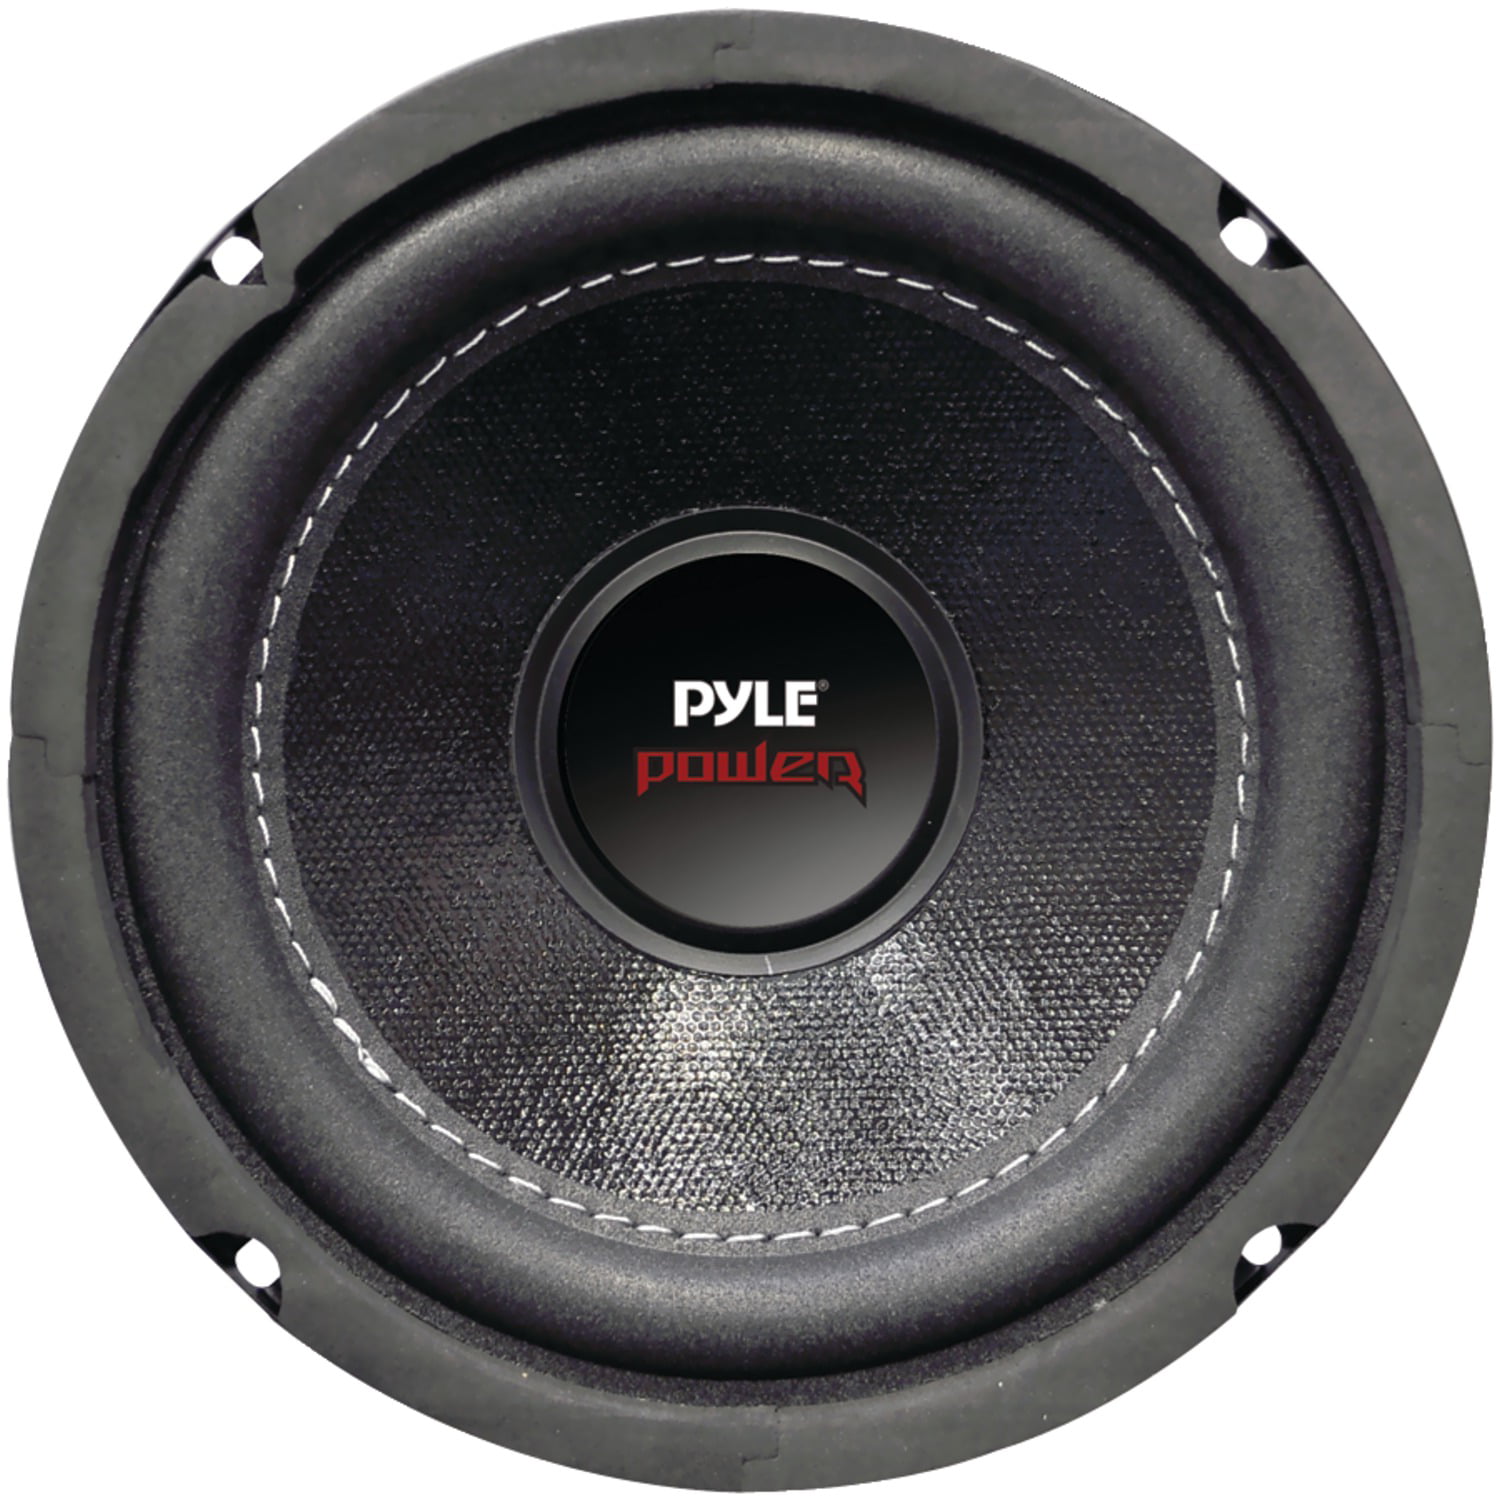 NEW 2 8" DVC Subwoofer Bass.Replacement.Speakers.Dual 4 ohm.Car Audio Subs.8in 